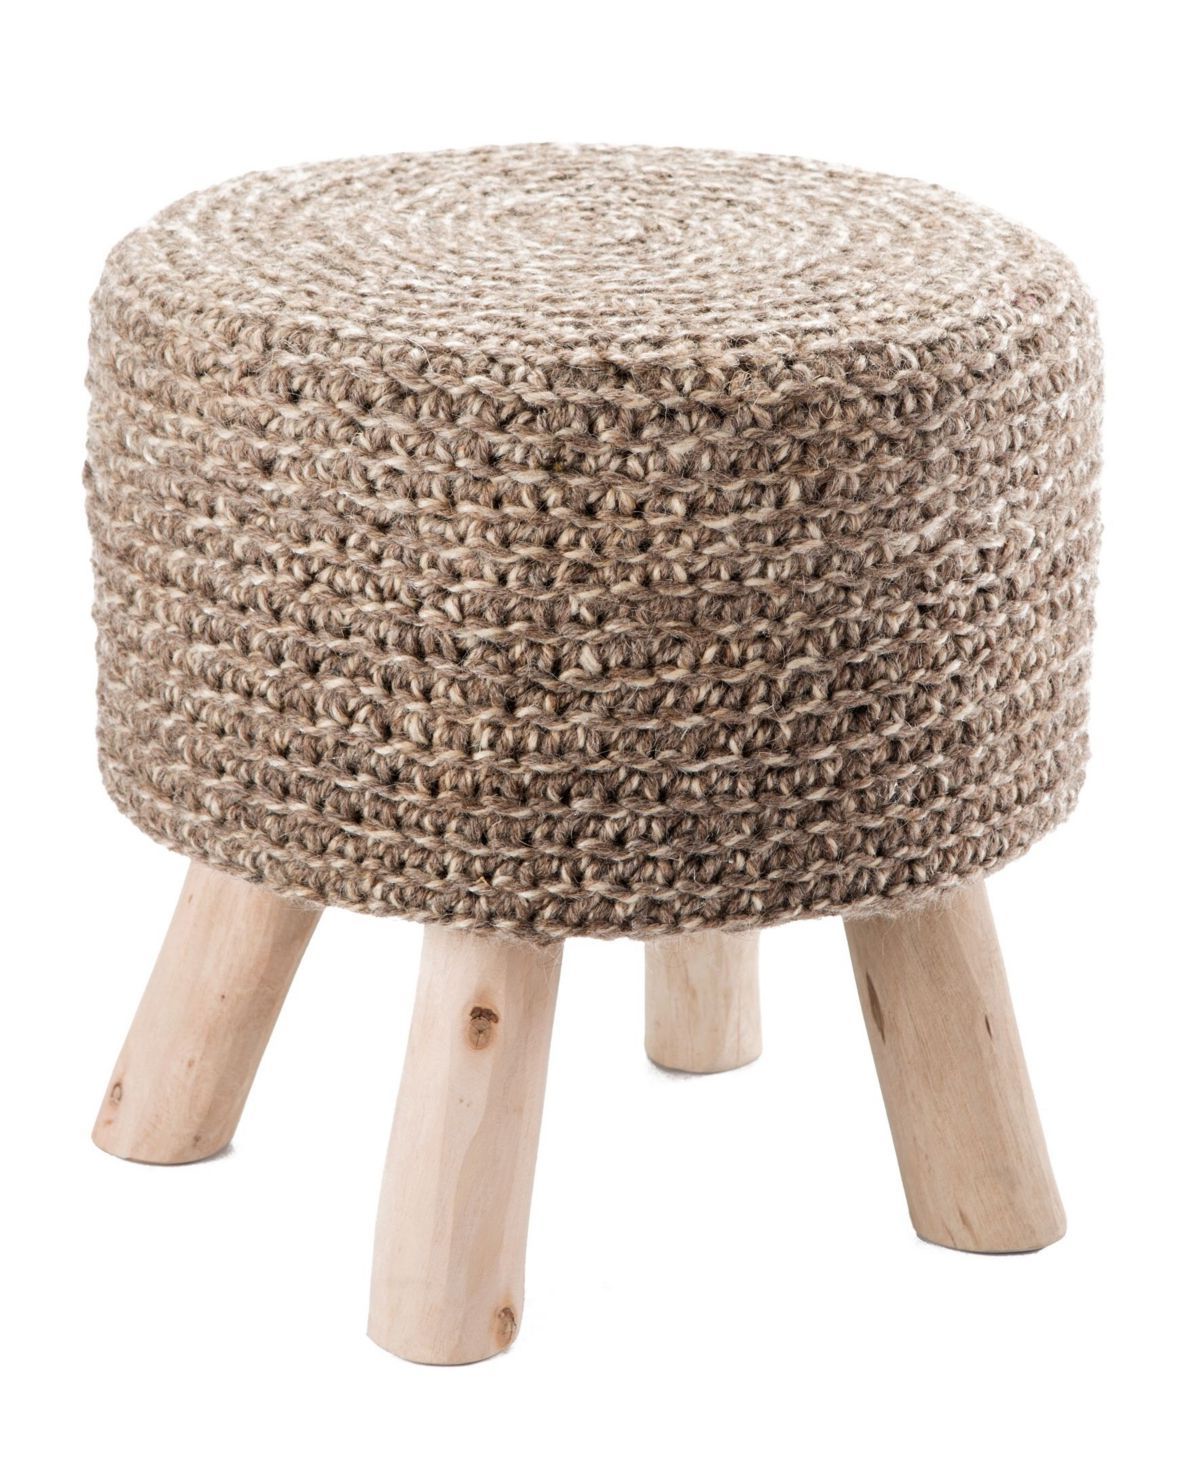 Scandinavia Knit Tan Wool Cube Pouf Ottomans Regarding Best And Newest Pin On Room Ideas (View 9 of 10)